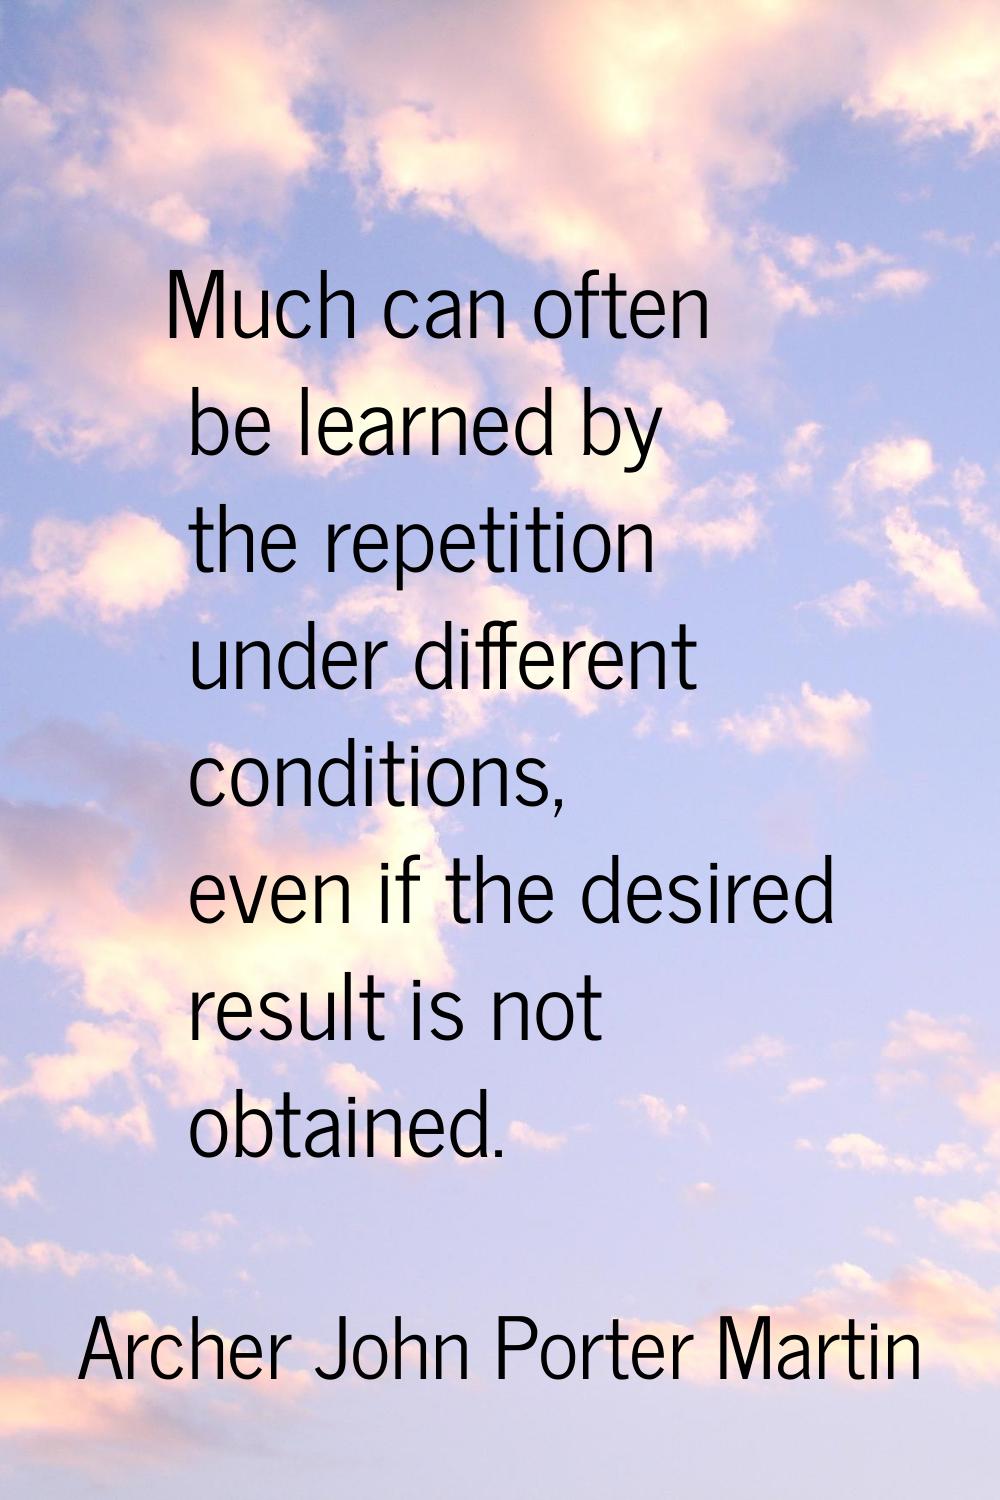 Much can often be learned by the repetition under different conditions, even if the desired result 